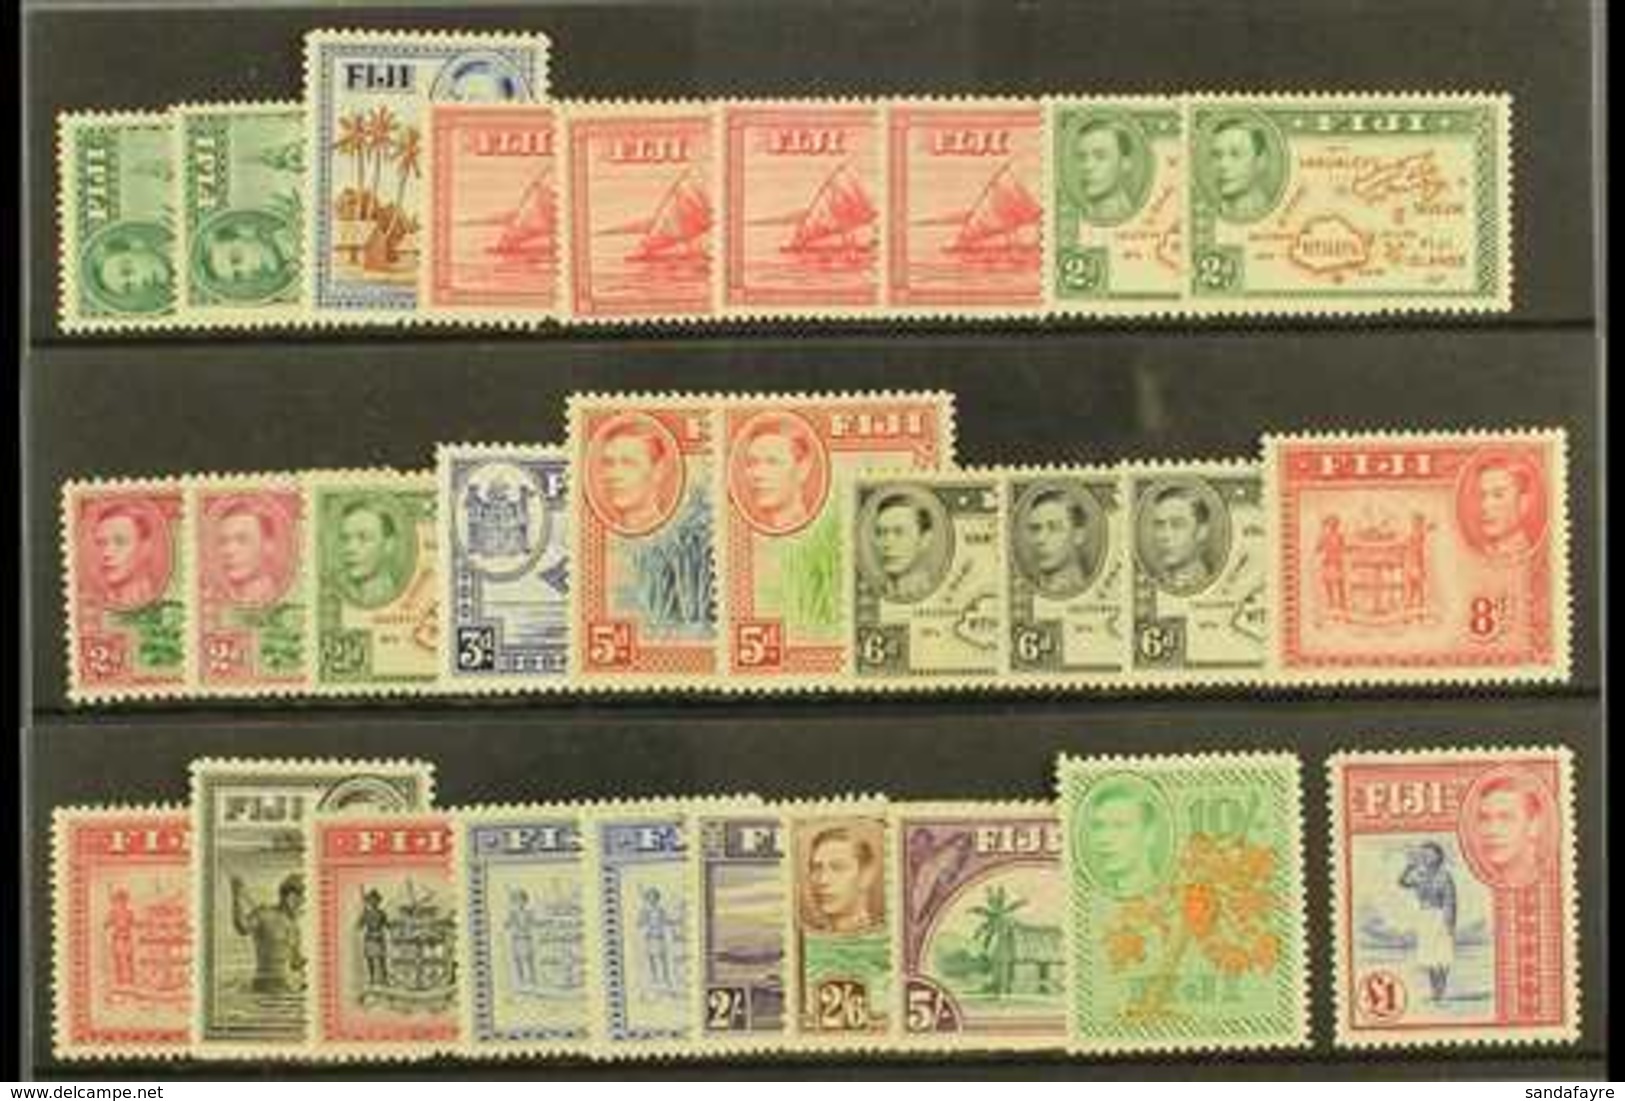 1938-55 Pictorial Definitive Set With 7 "Extra" Perf/Die Variants, SG 249/66b, Mint, Some Issues With Hint Of Tropicaliz - Fiji (...-1970)